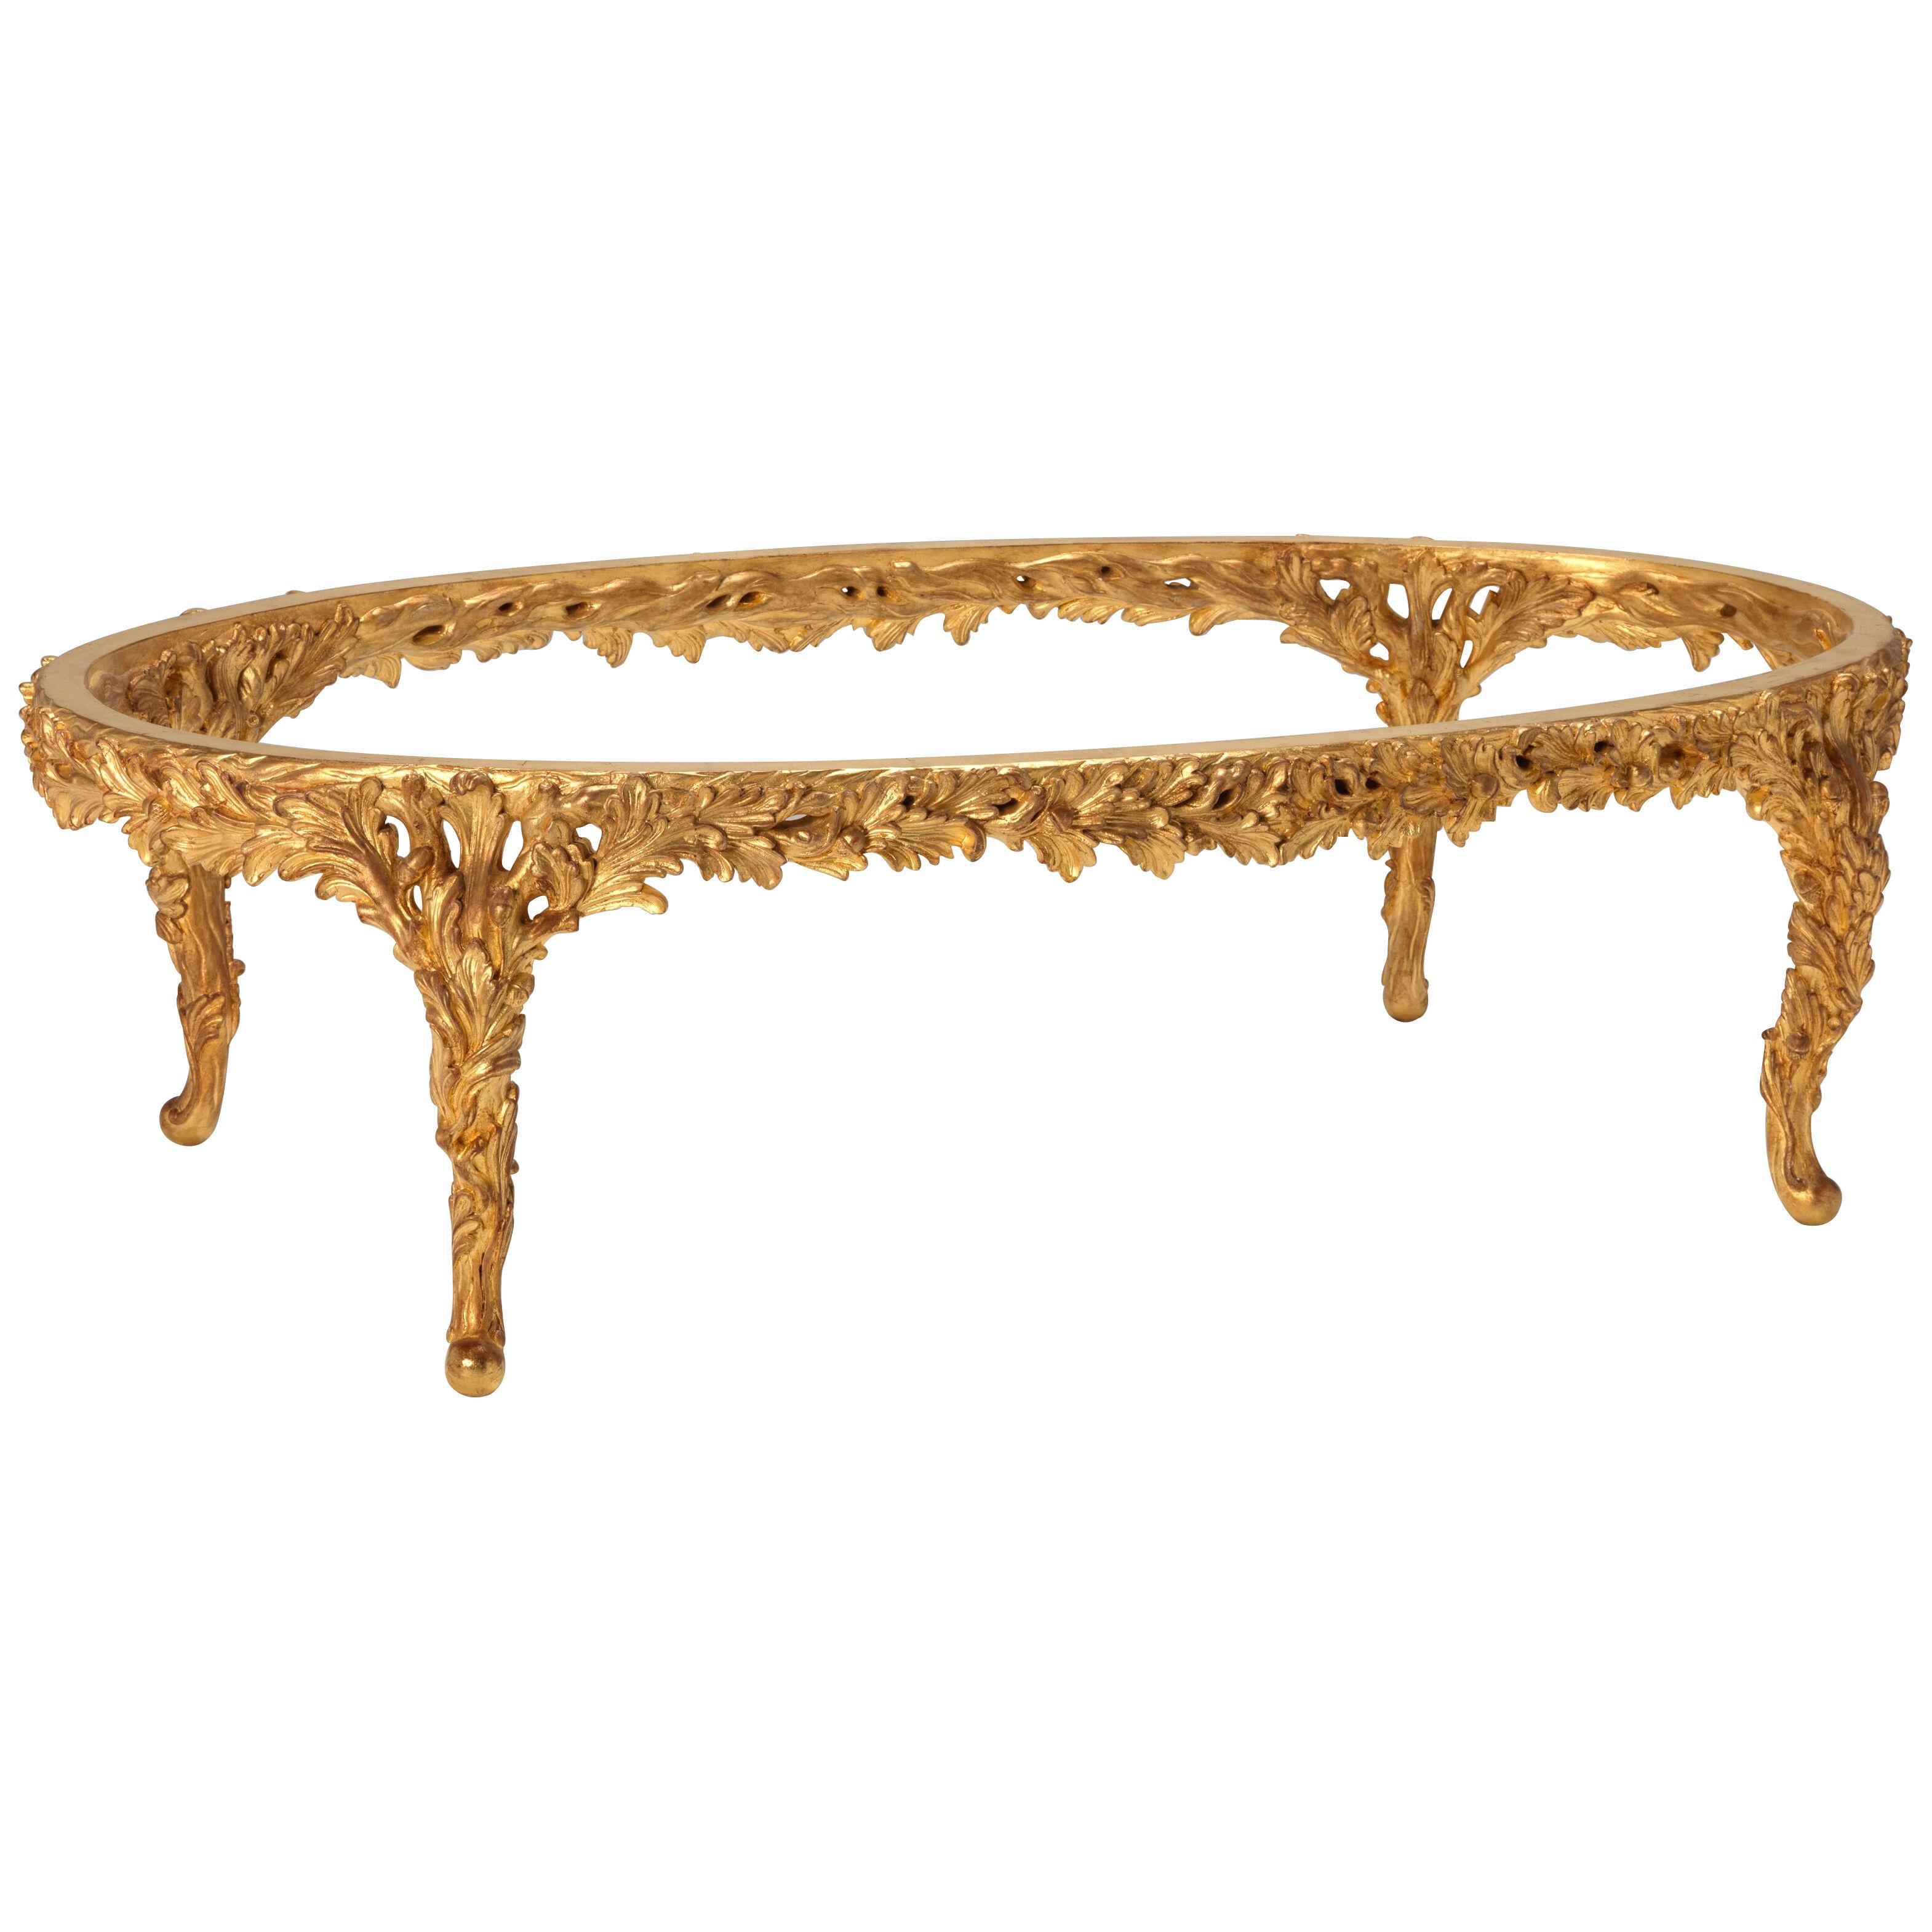 Chippendale Naturalistic Style Oval Coffee Table / Stool